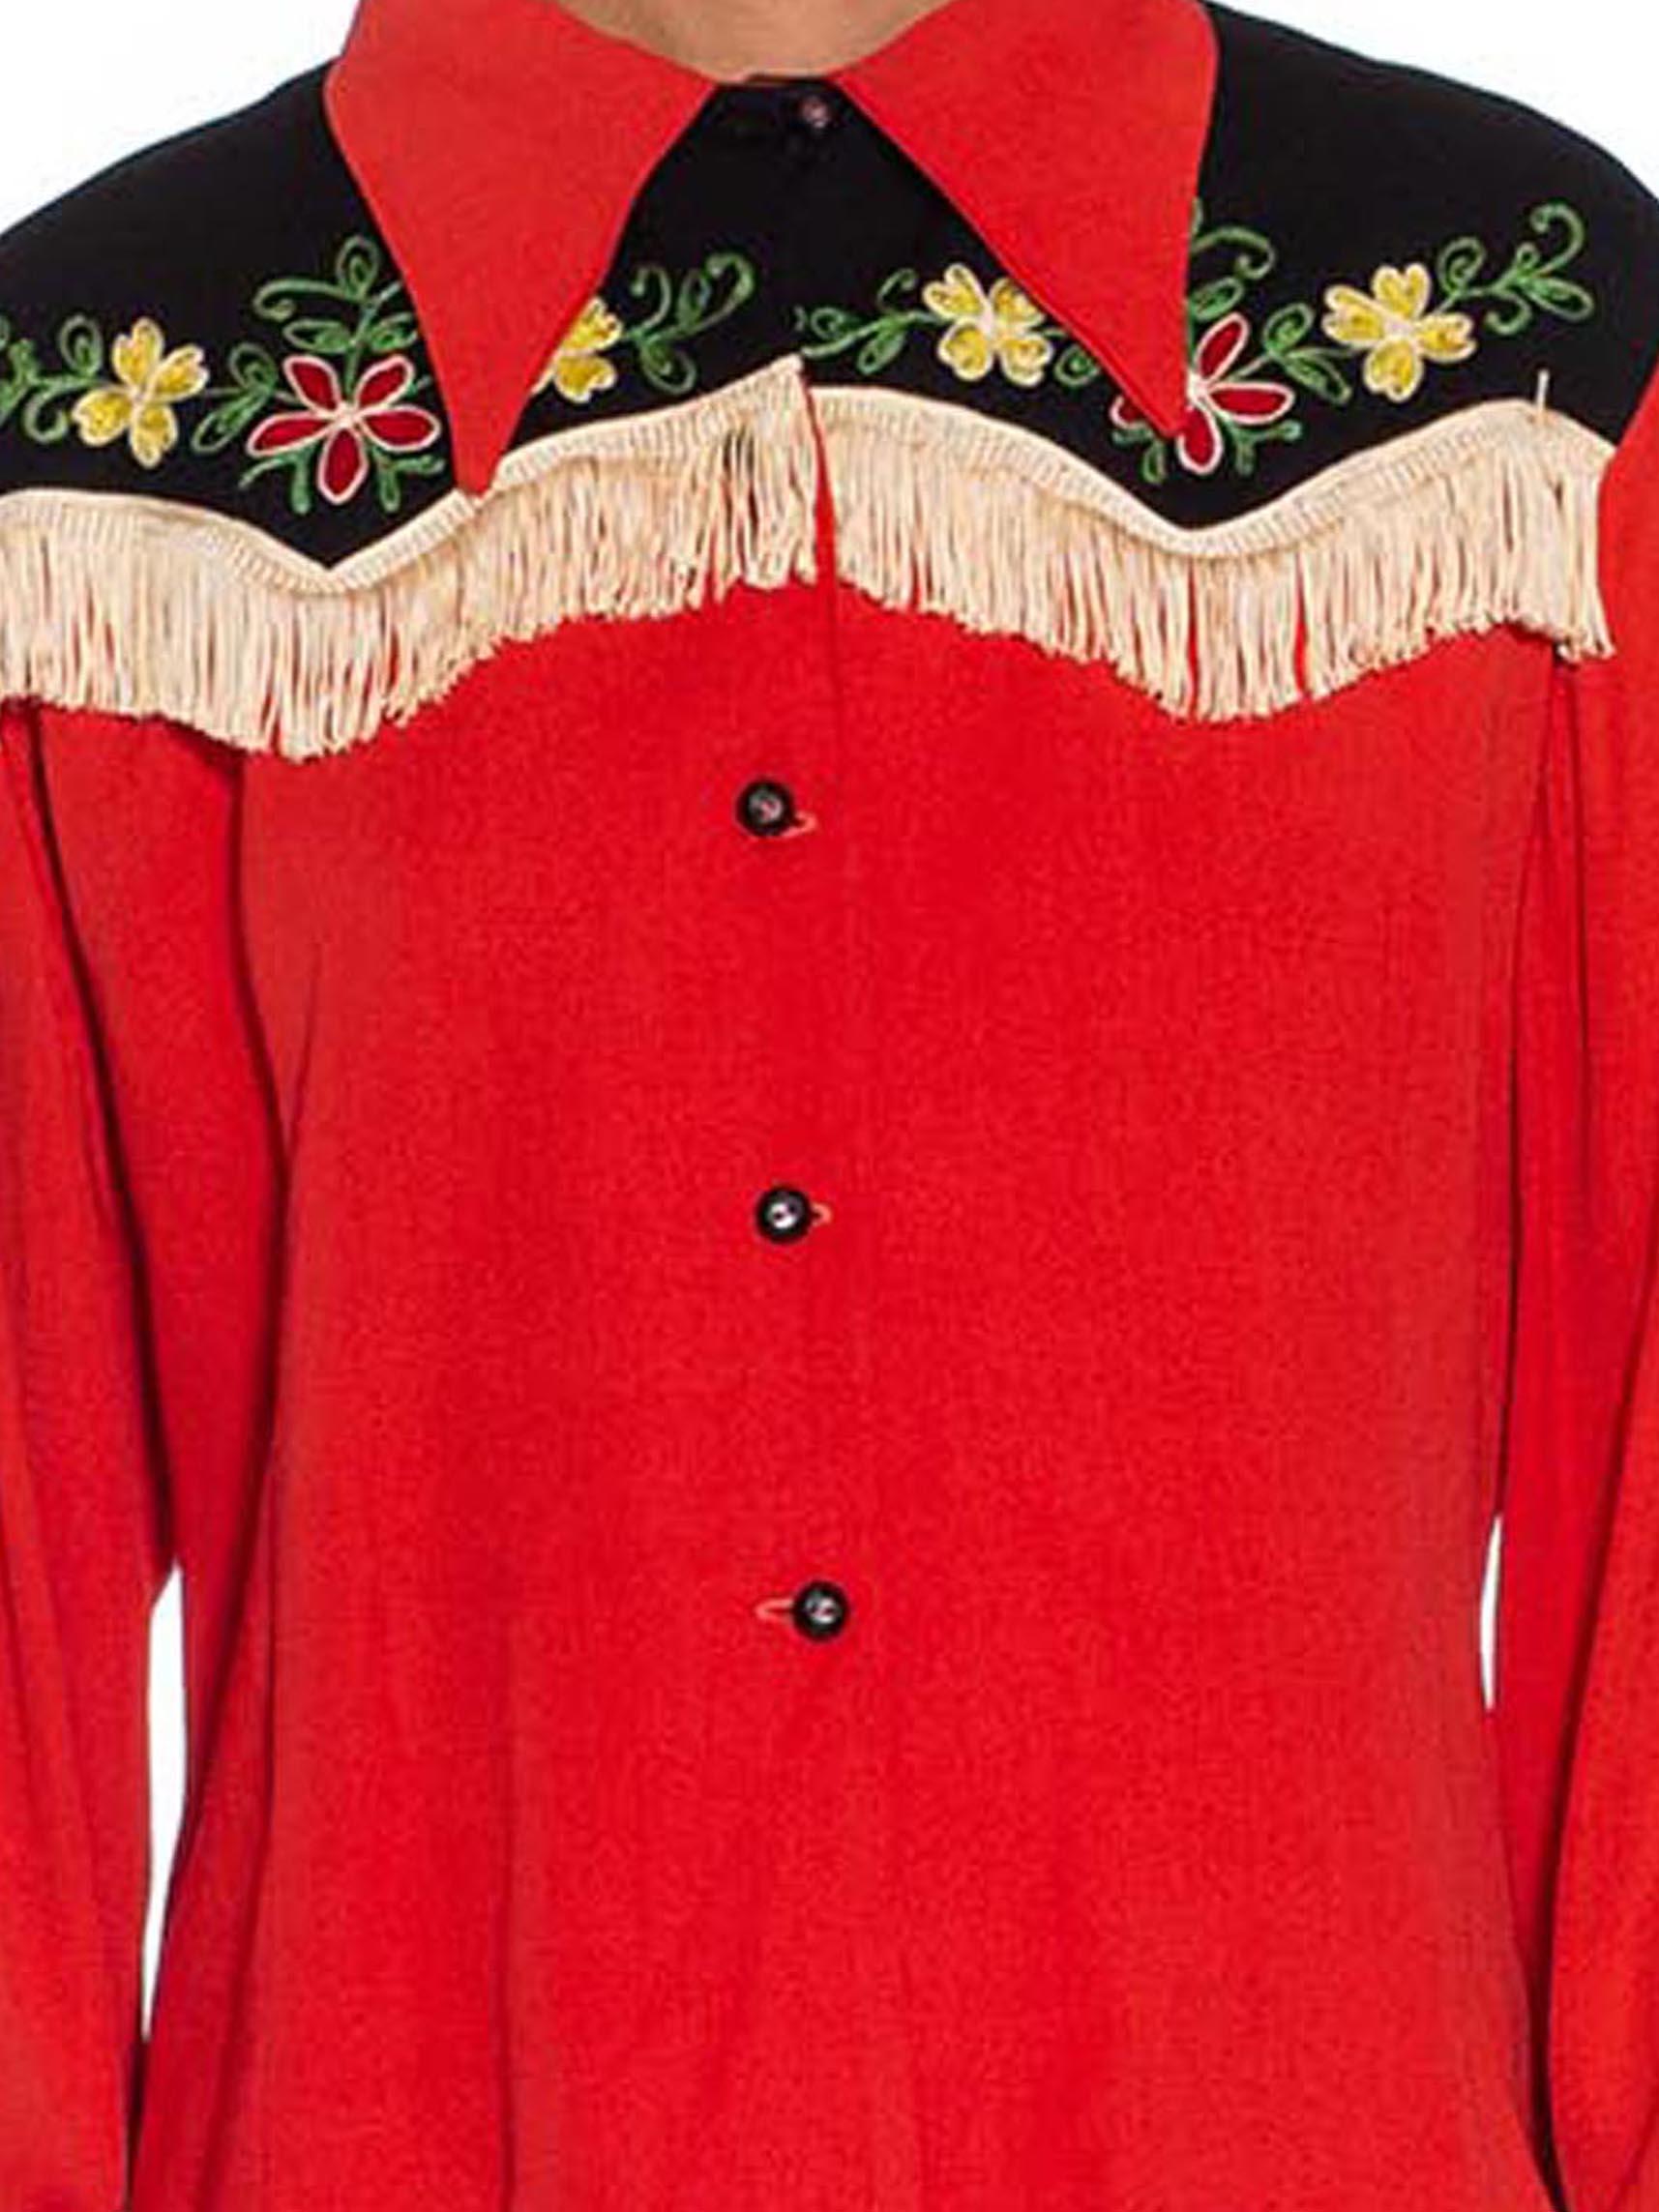 1940S Tomato Red & Black Rayon Western Shirt With Floral Embroidery Fringe 4